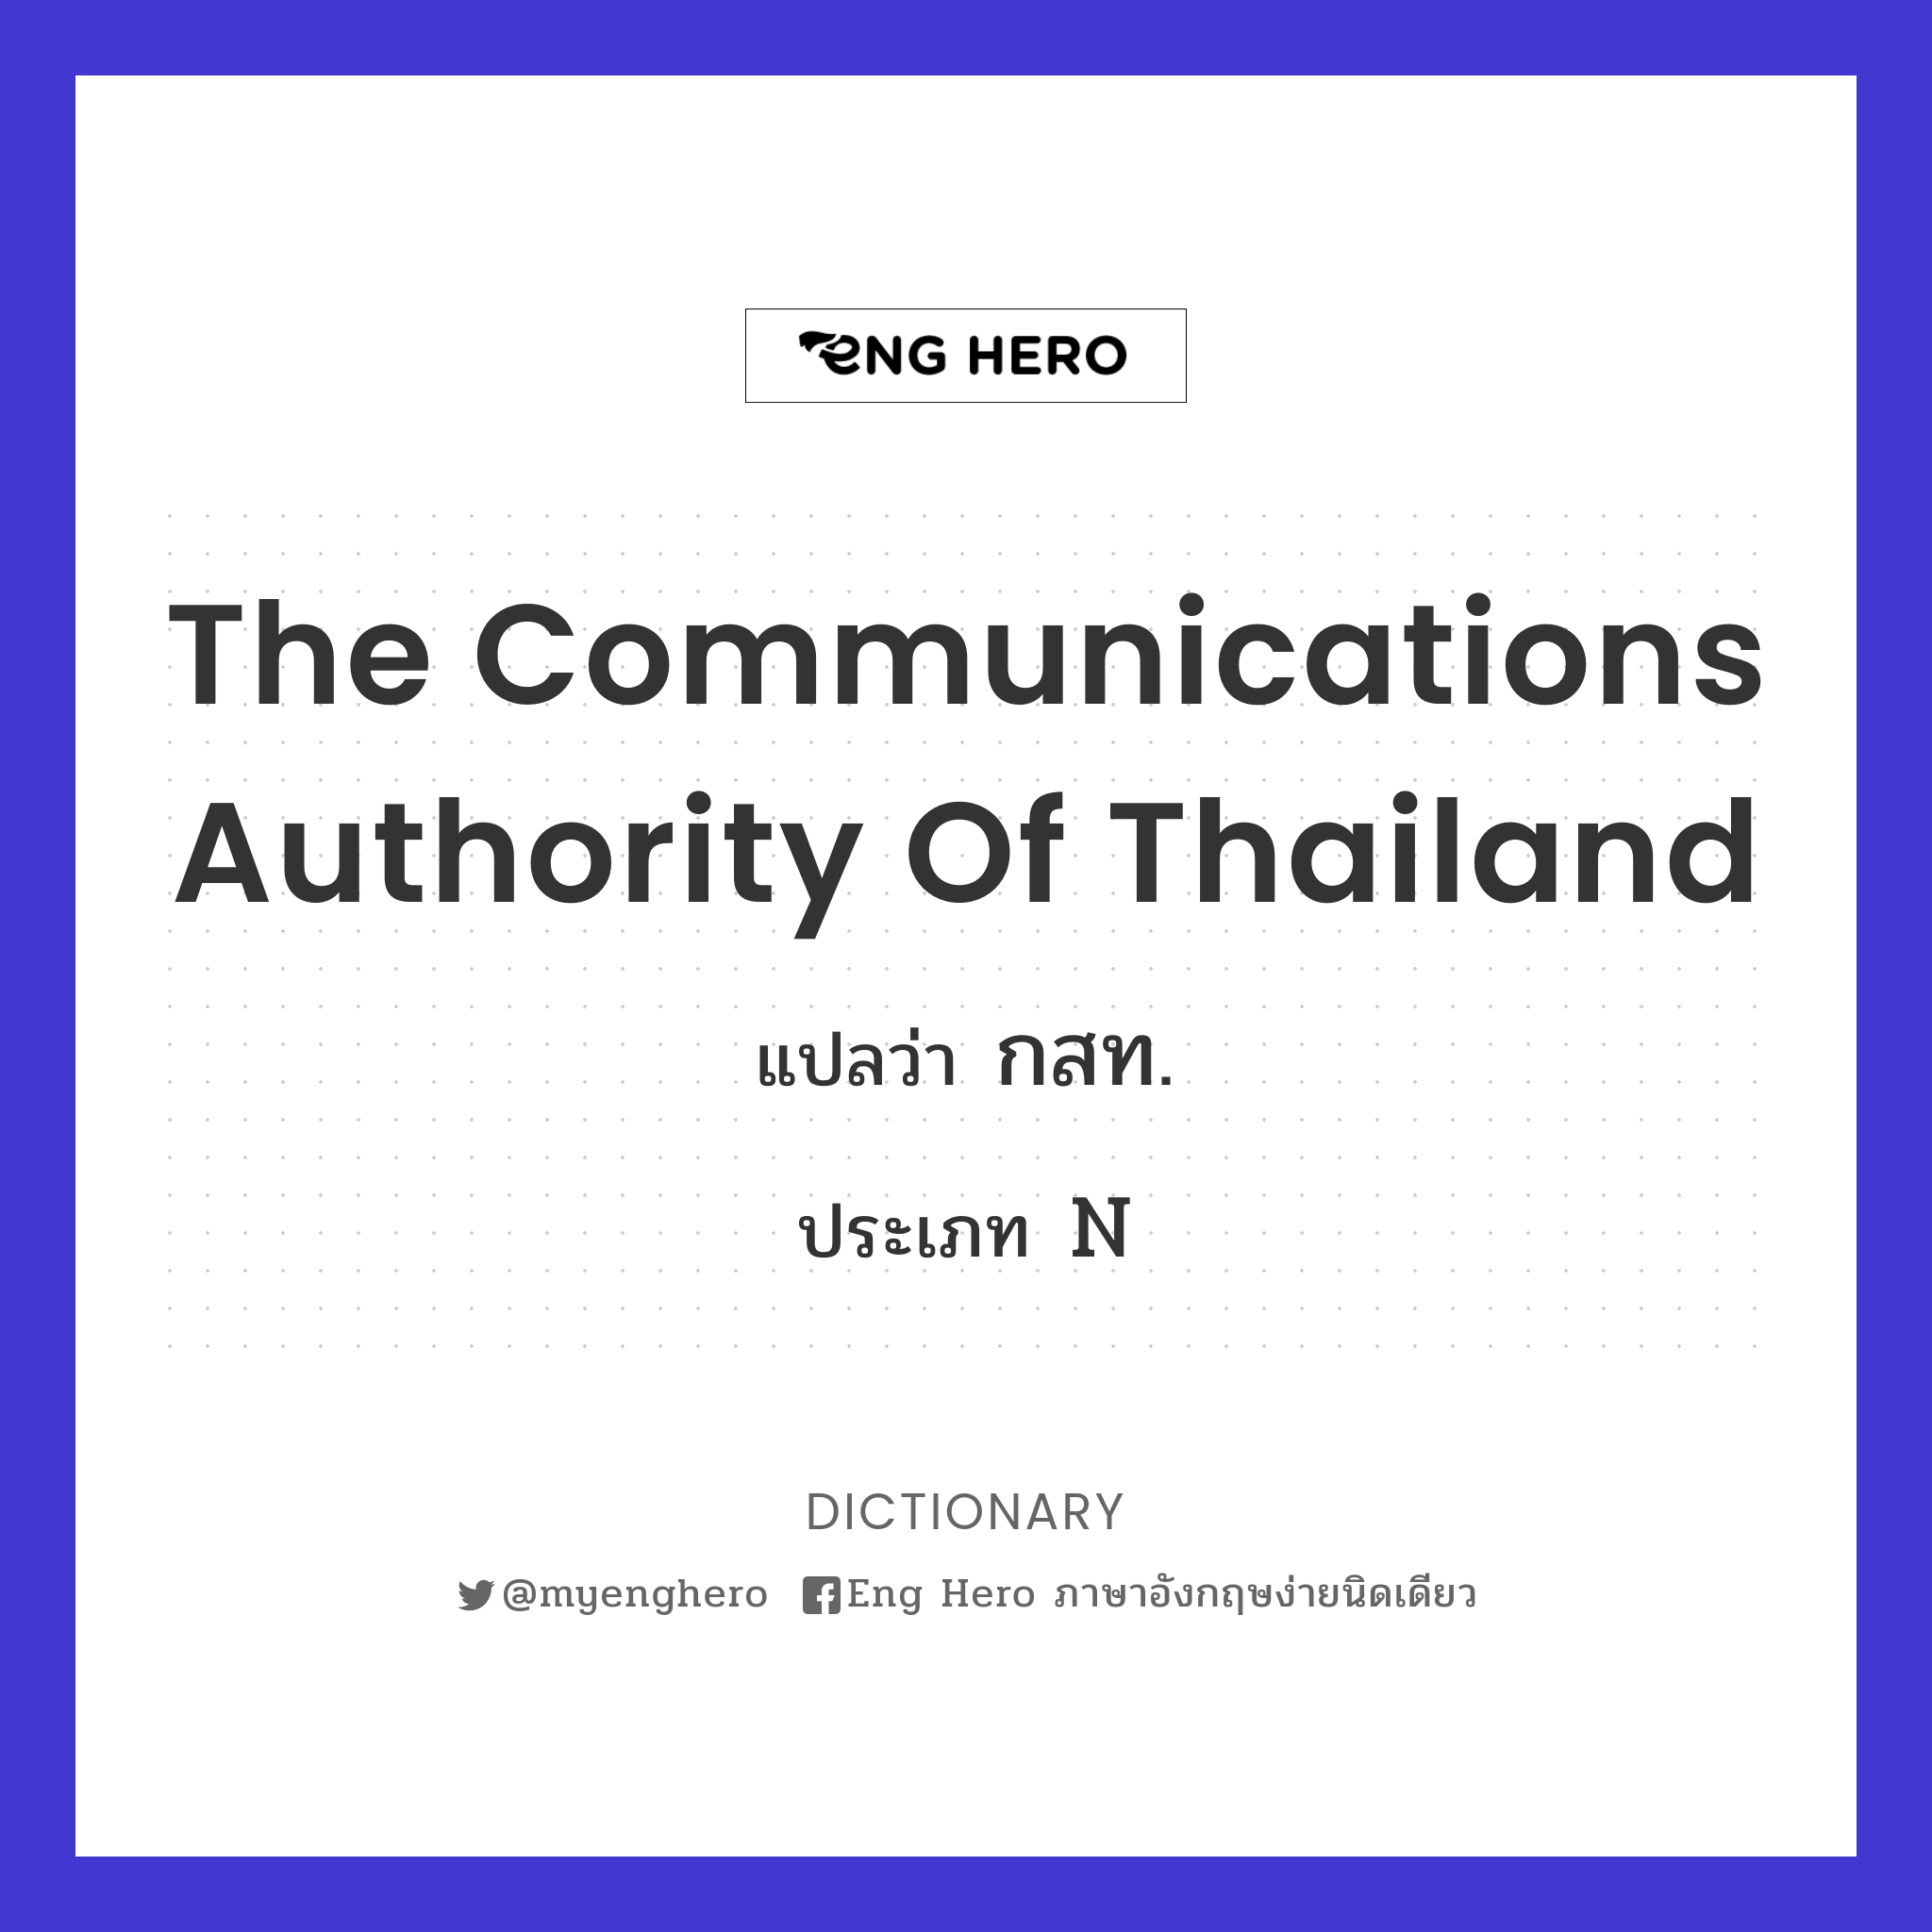 The Communications Authority of Thailand